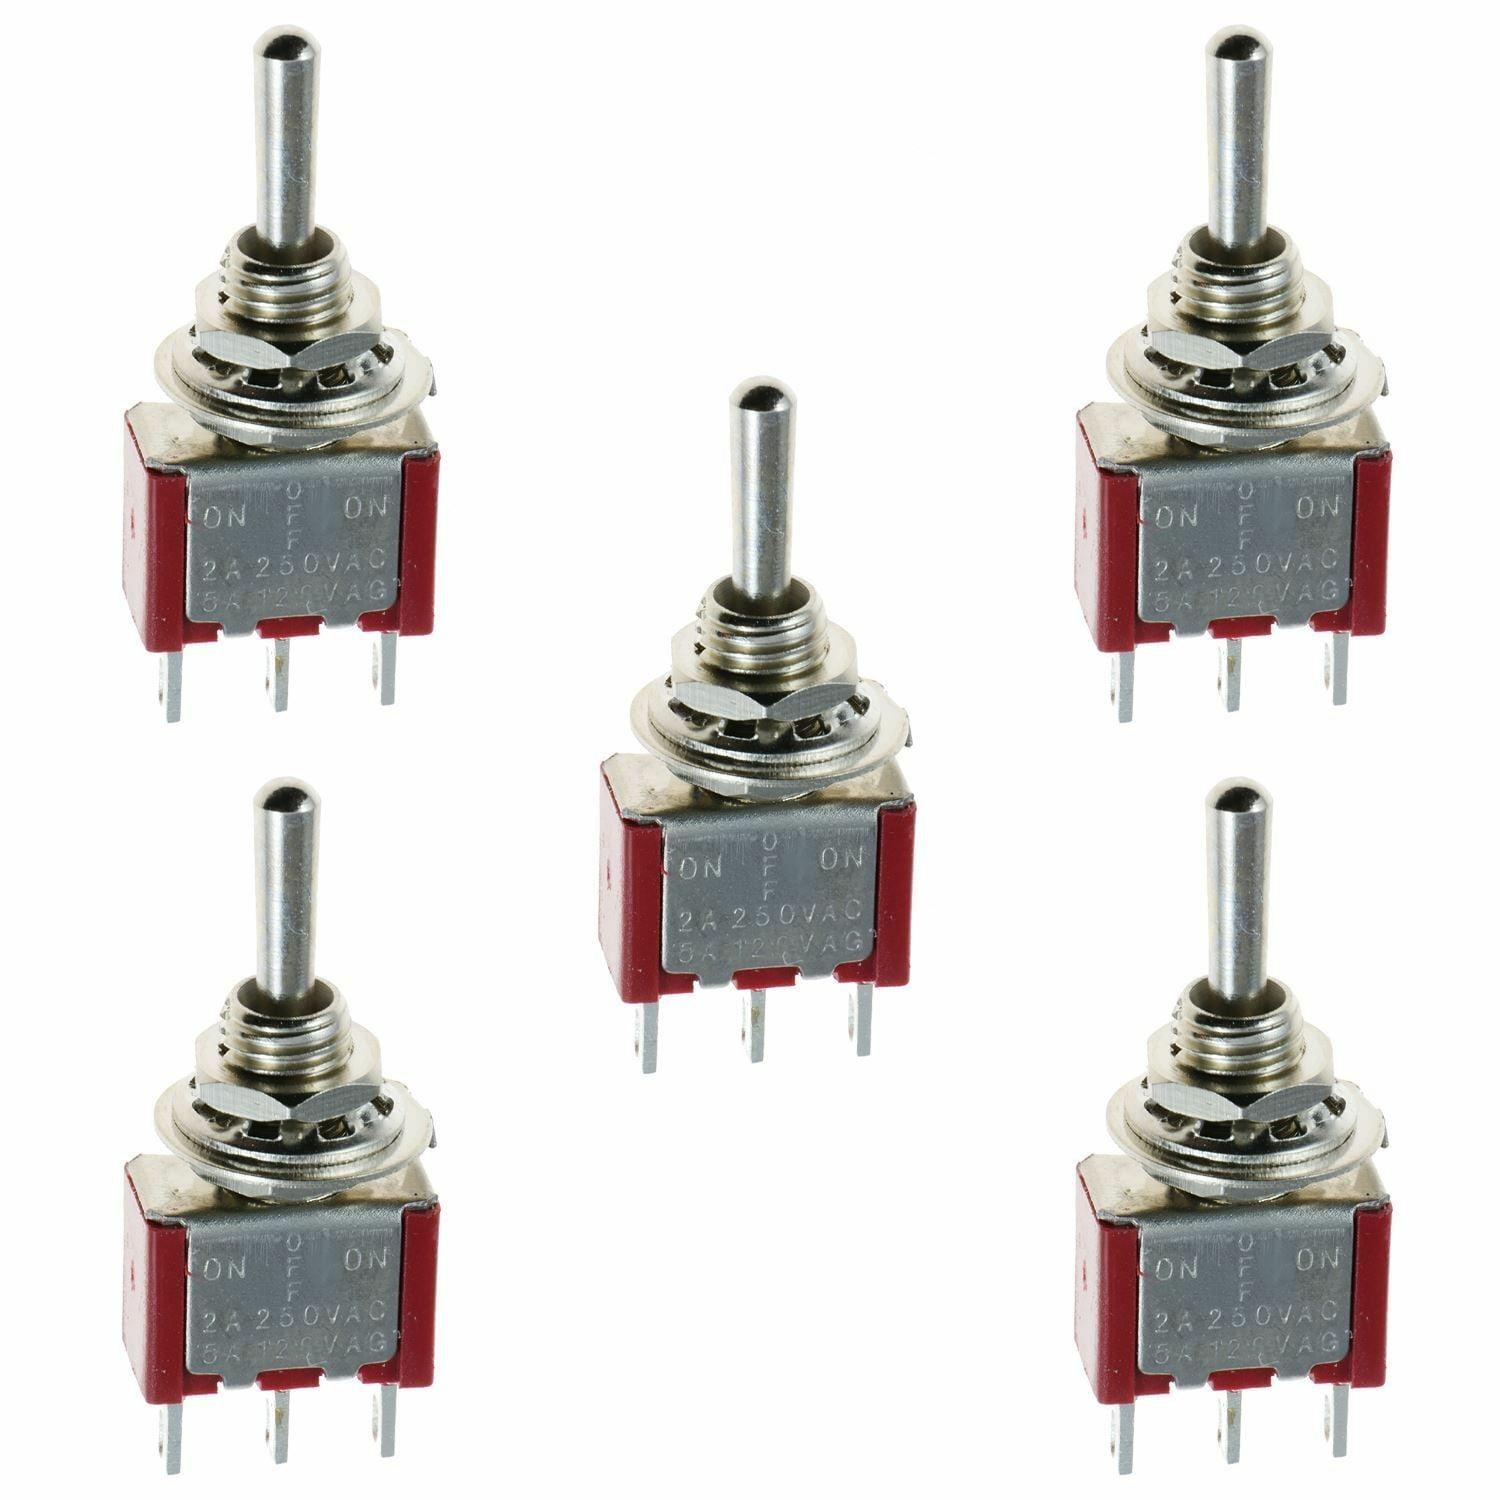 On 5 x Mini Momentary Off Toggle Switch Model Railway SPDT 12V On 